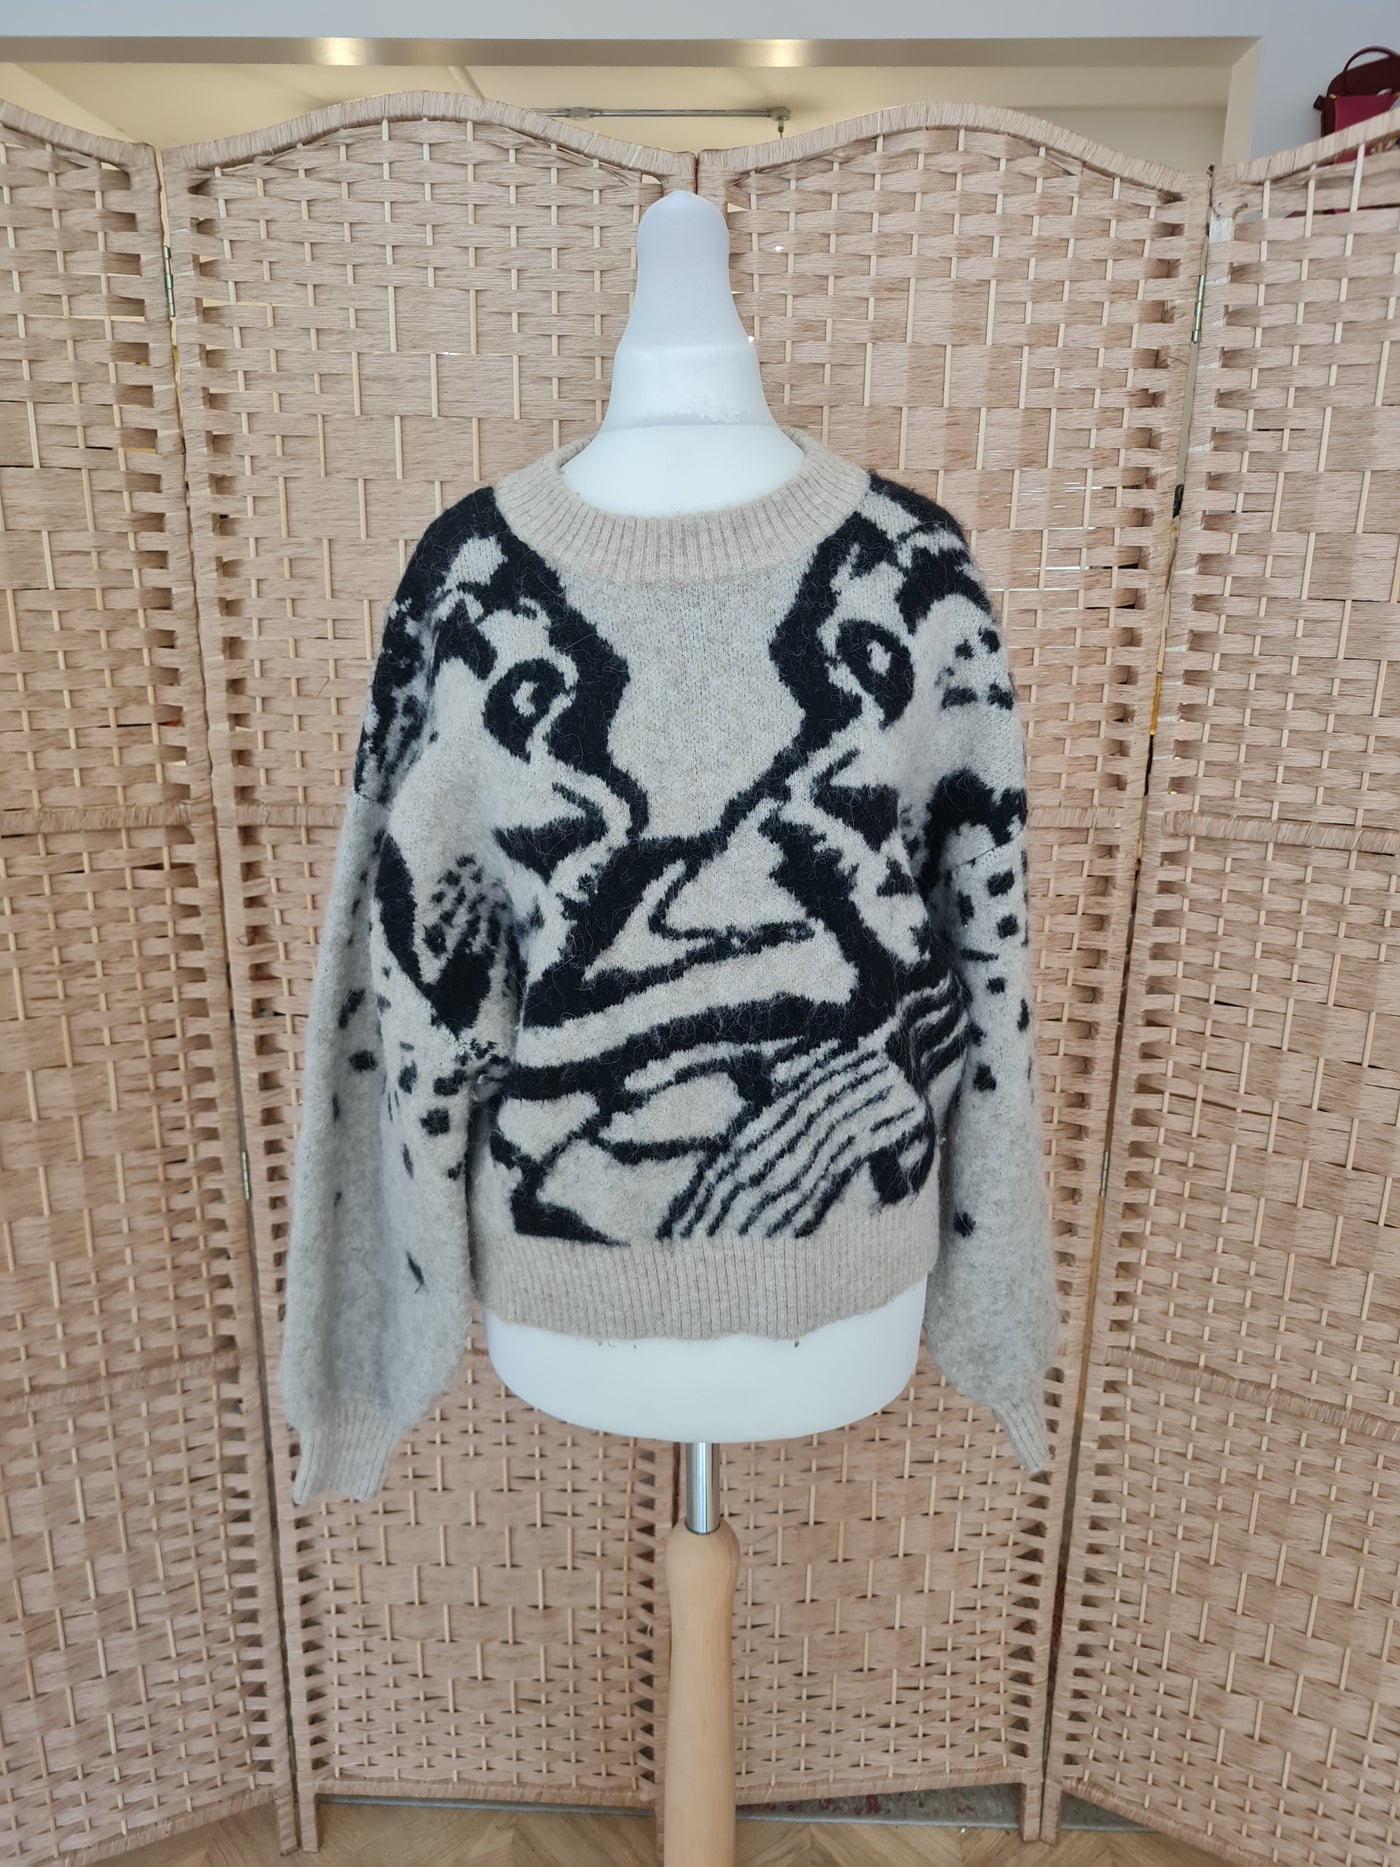 & Other stories Jumper S